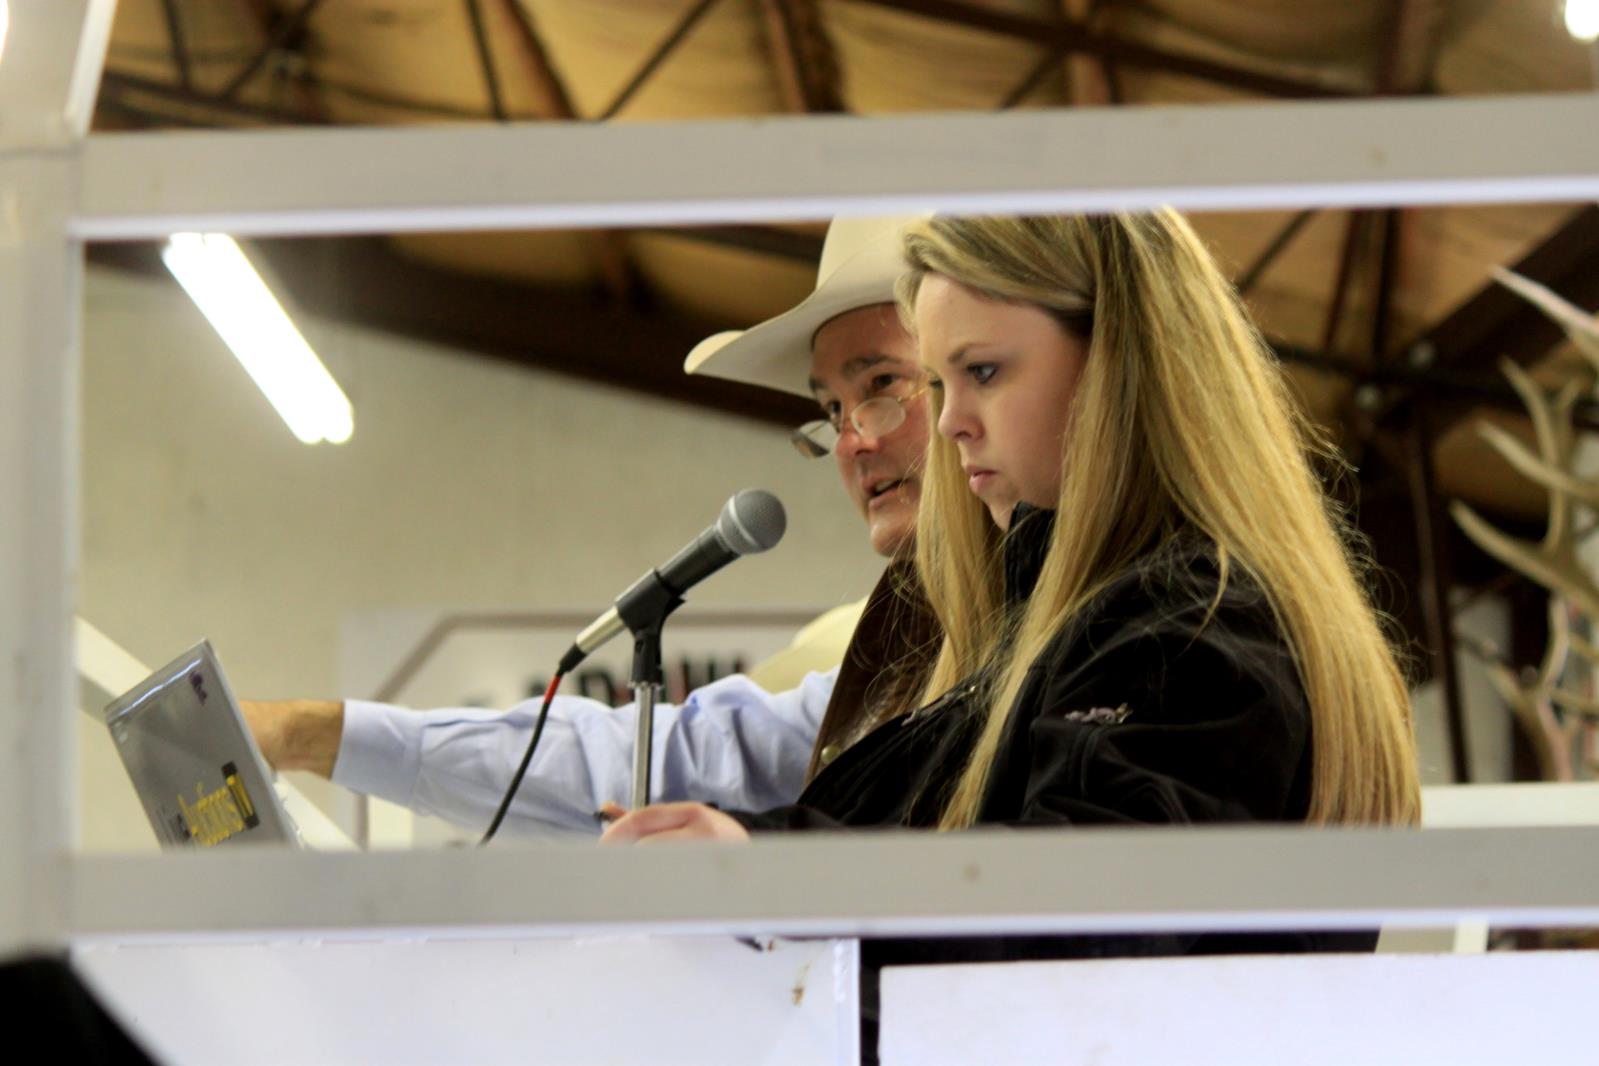 Katie Colyer, shown here, travels the country with cattle auction sale support and her photography/videography business.